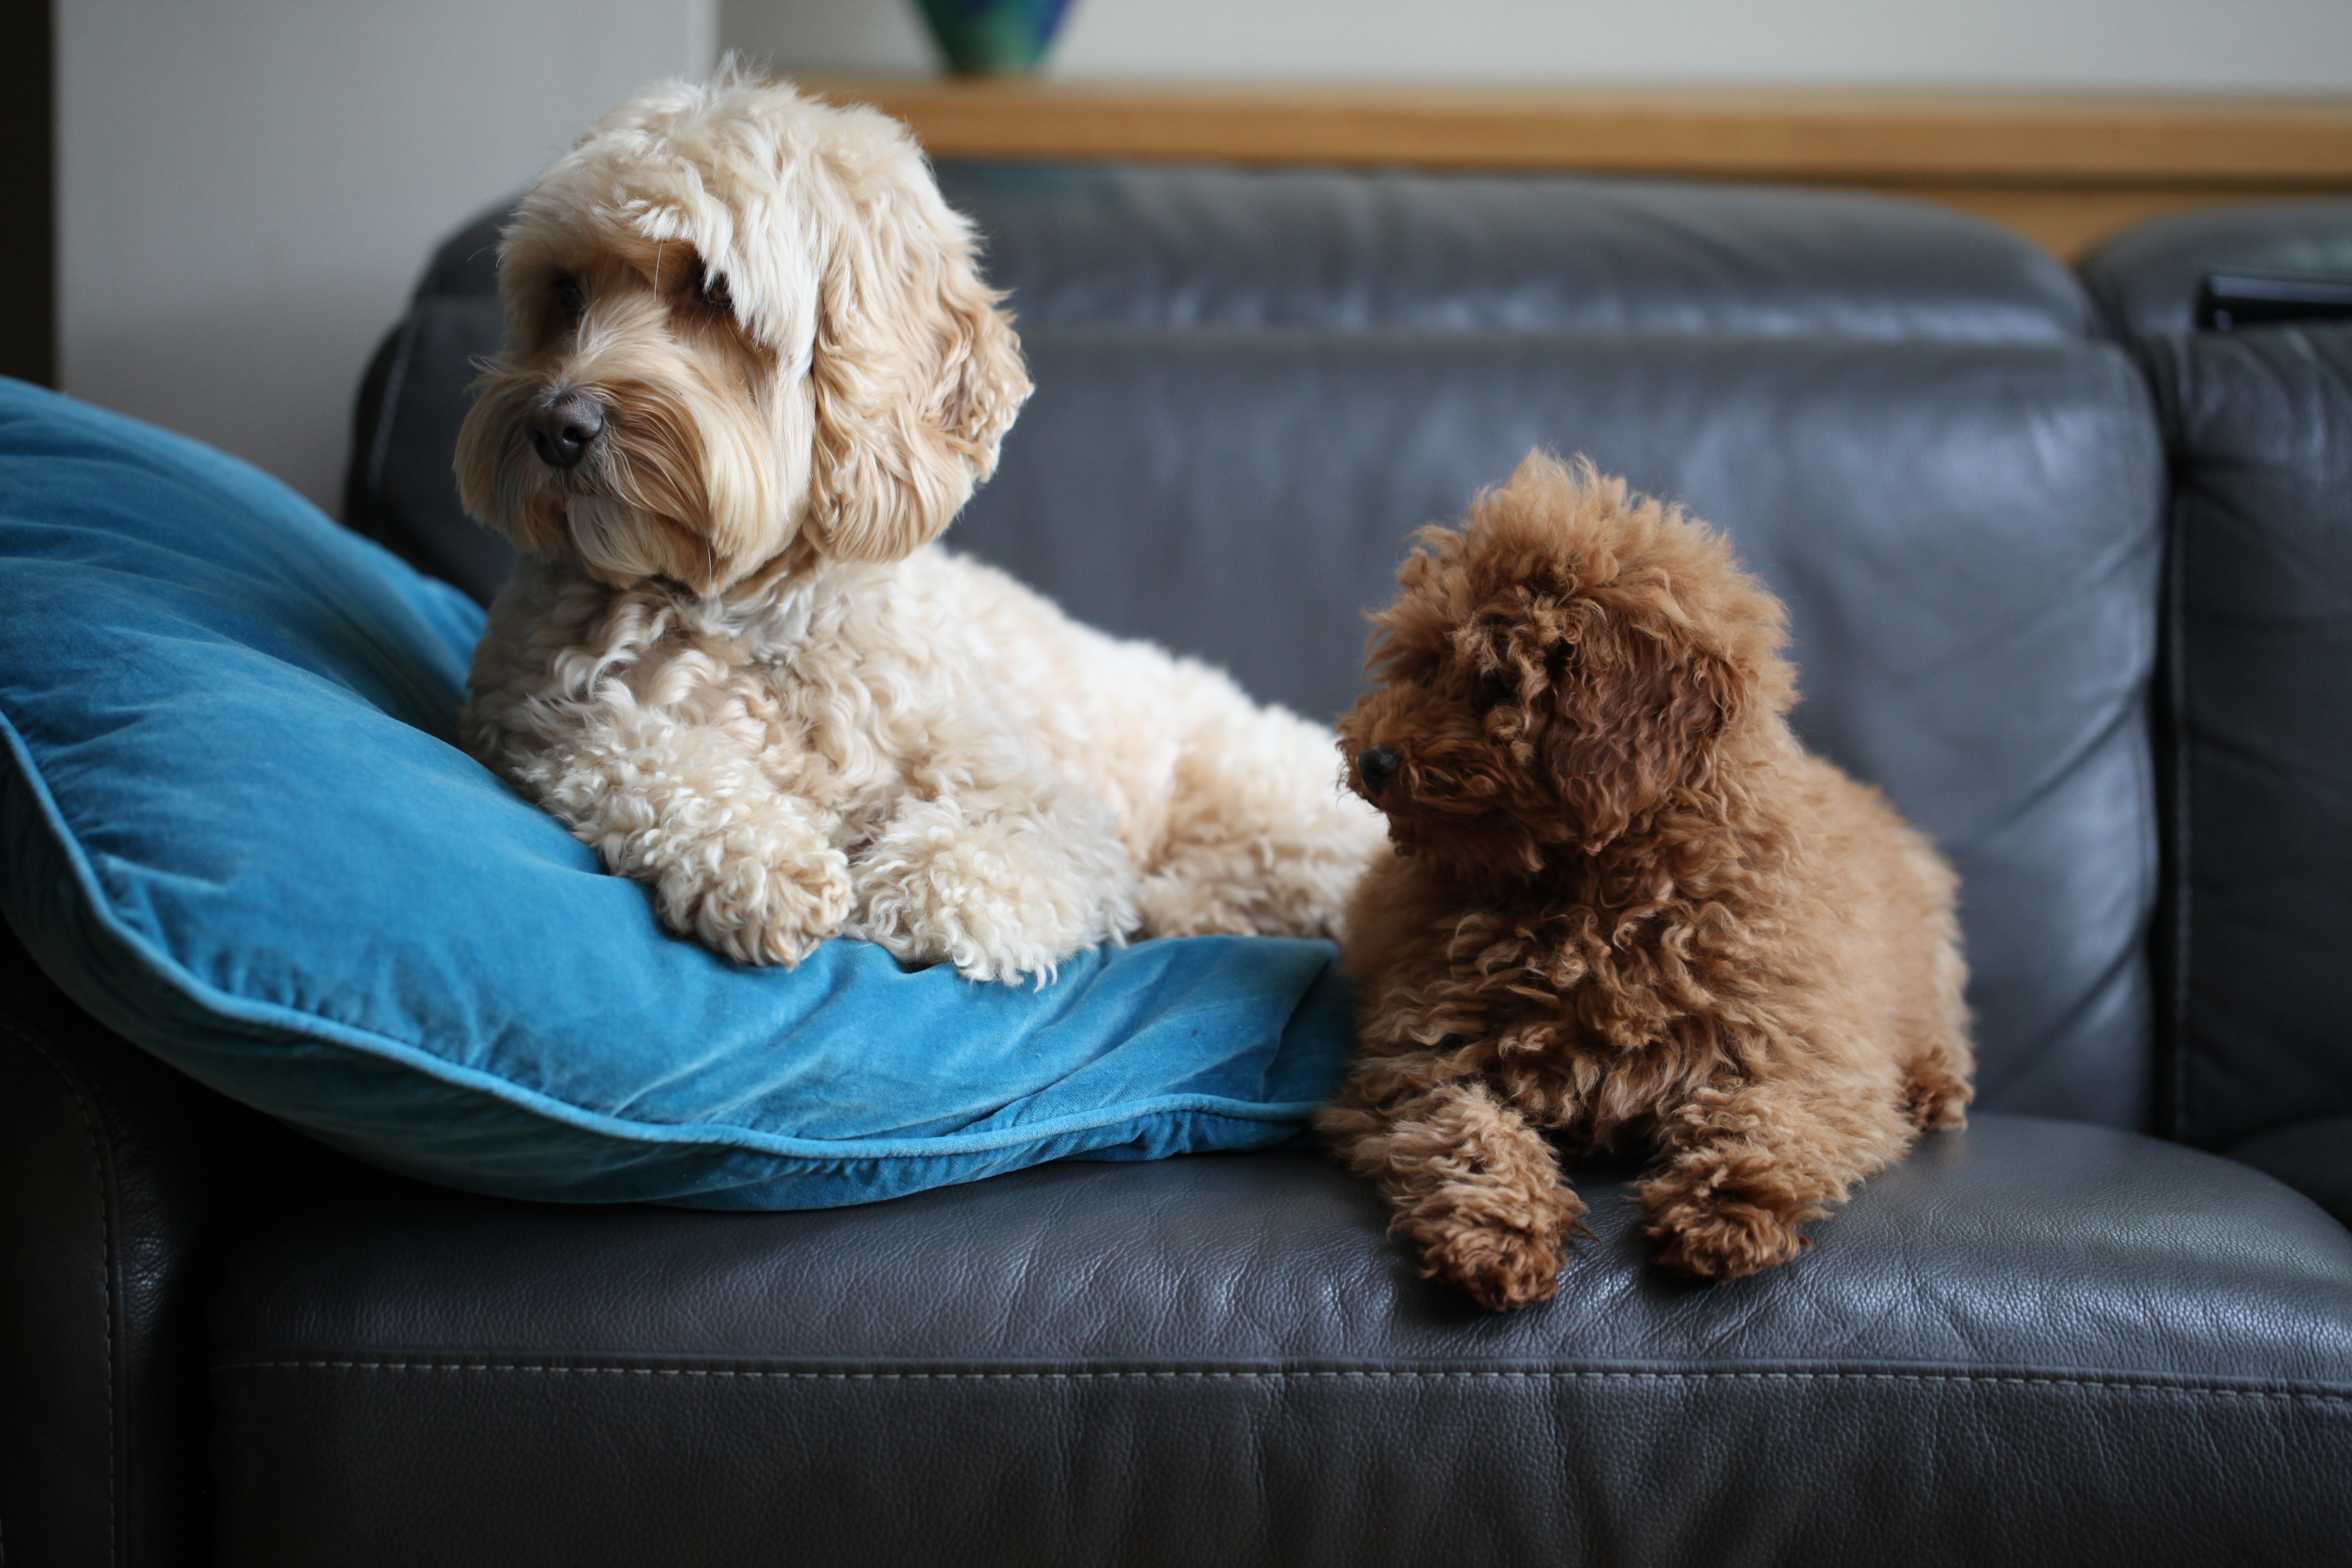 Two curly-haired dogs, one white and one brown, on black leather sofa